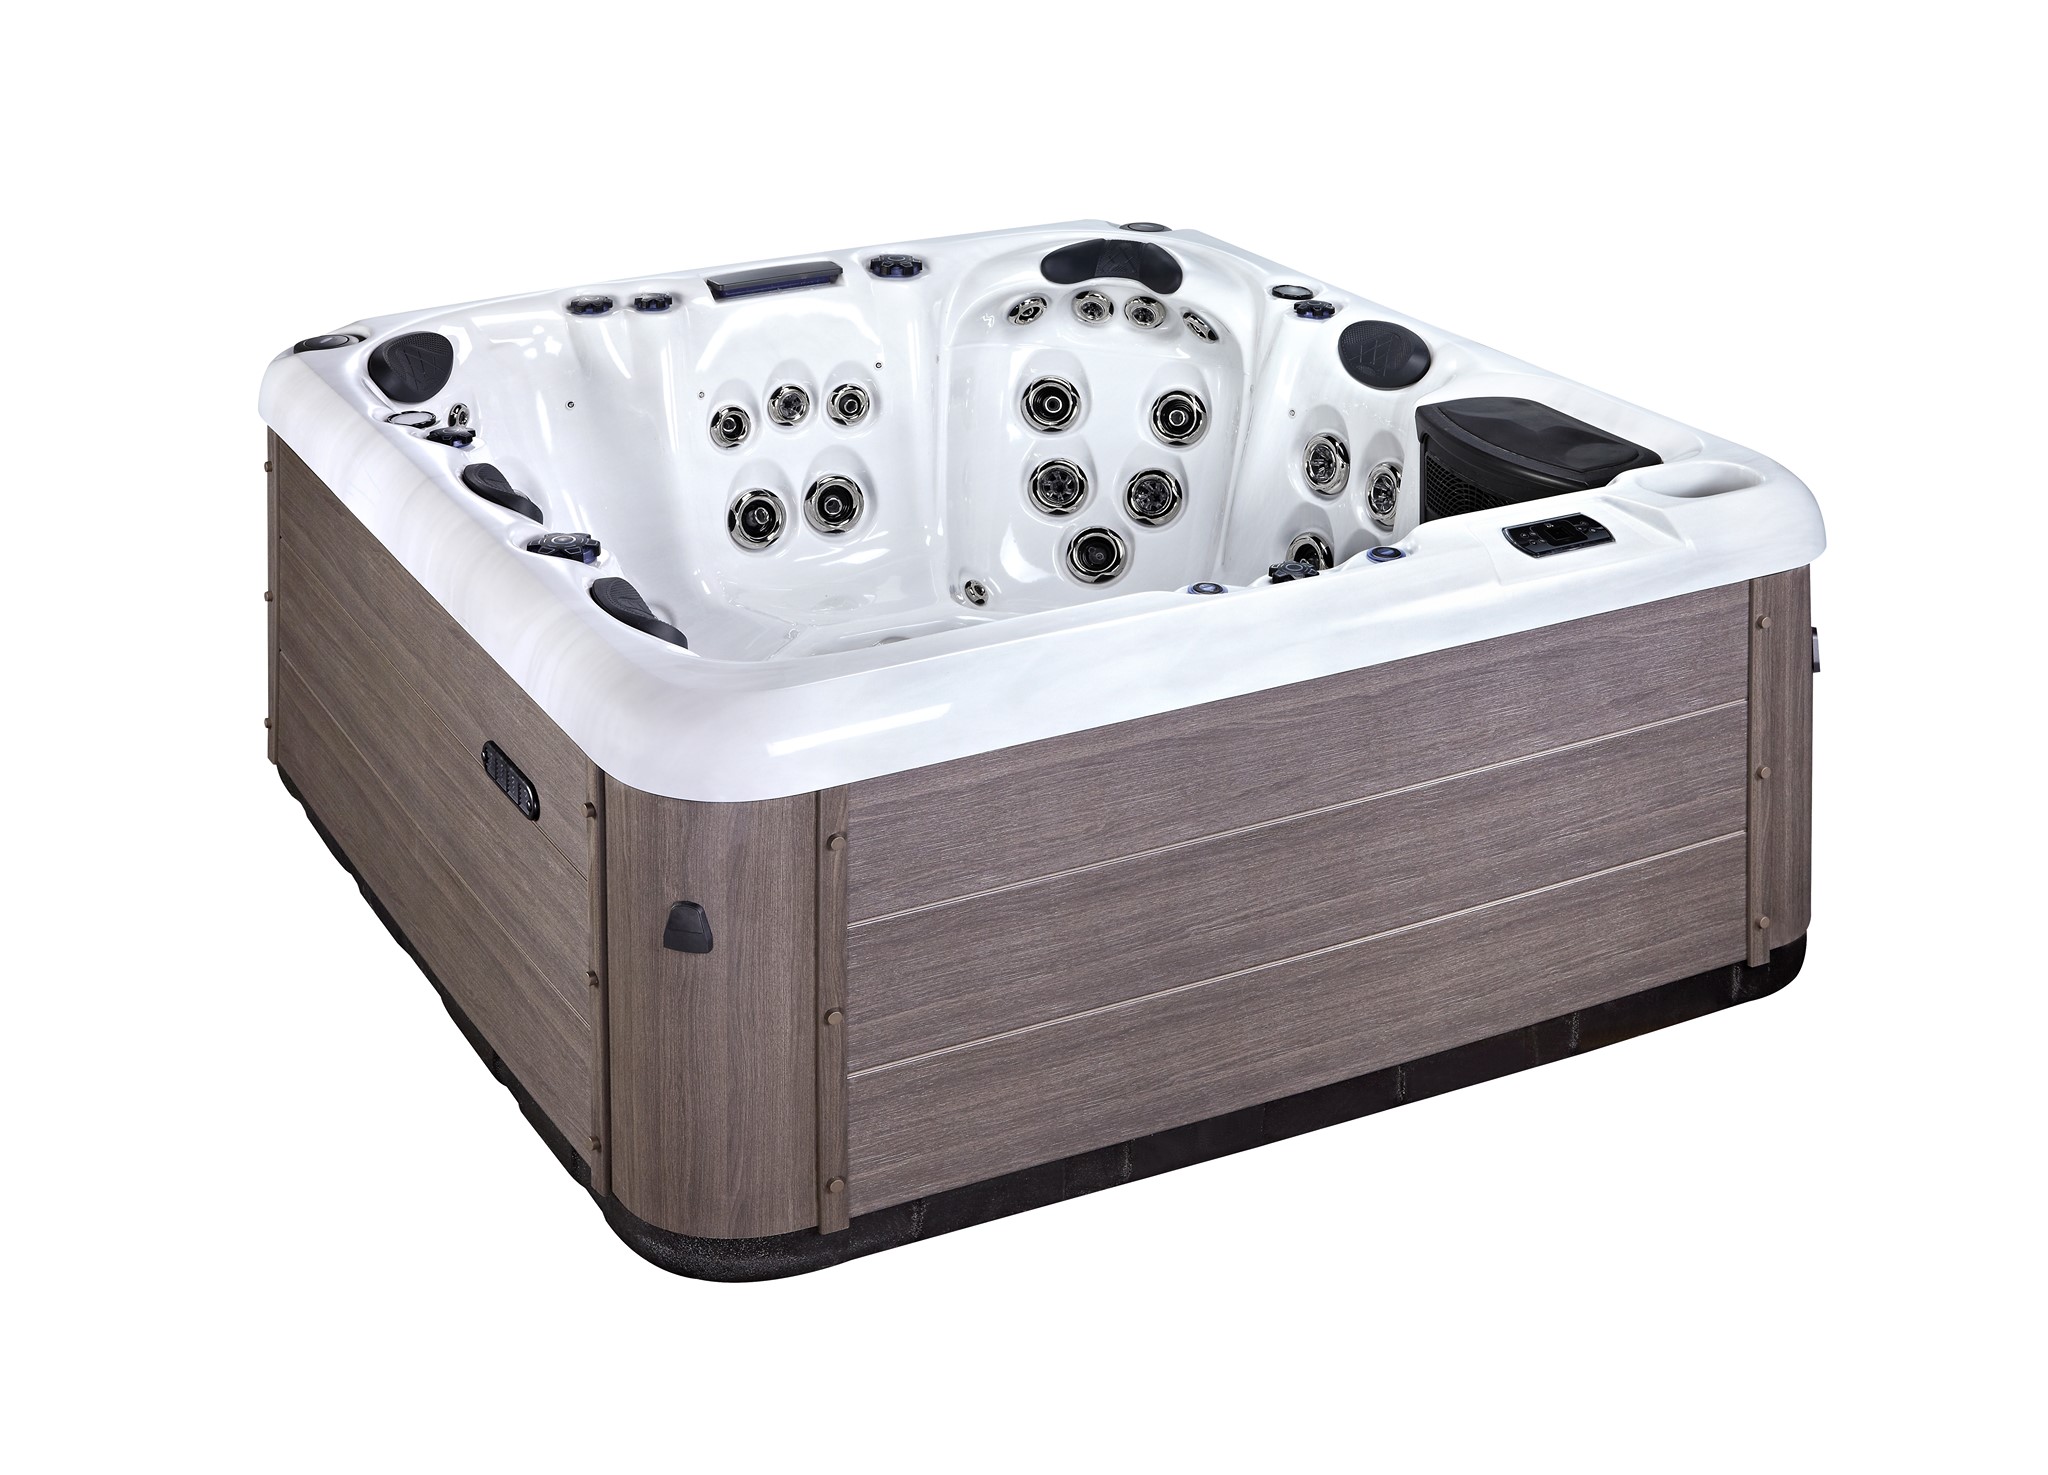 Quality, stylish design and comfort
 Favells Caesar spa is perfect for 6 people, and includes 56 jets, water features an... » Outdoor Furniture Fuengirola, Costa Del Sol, Spain